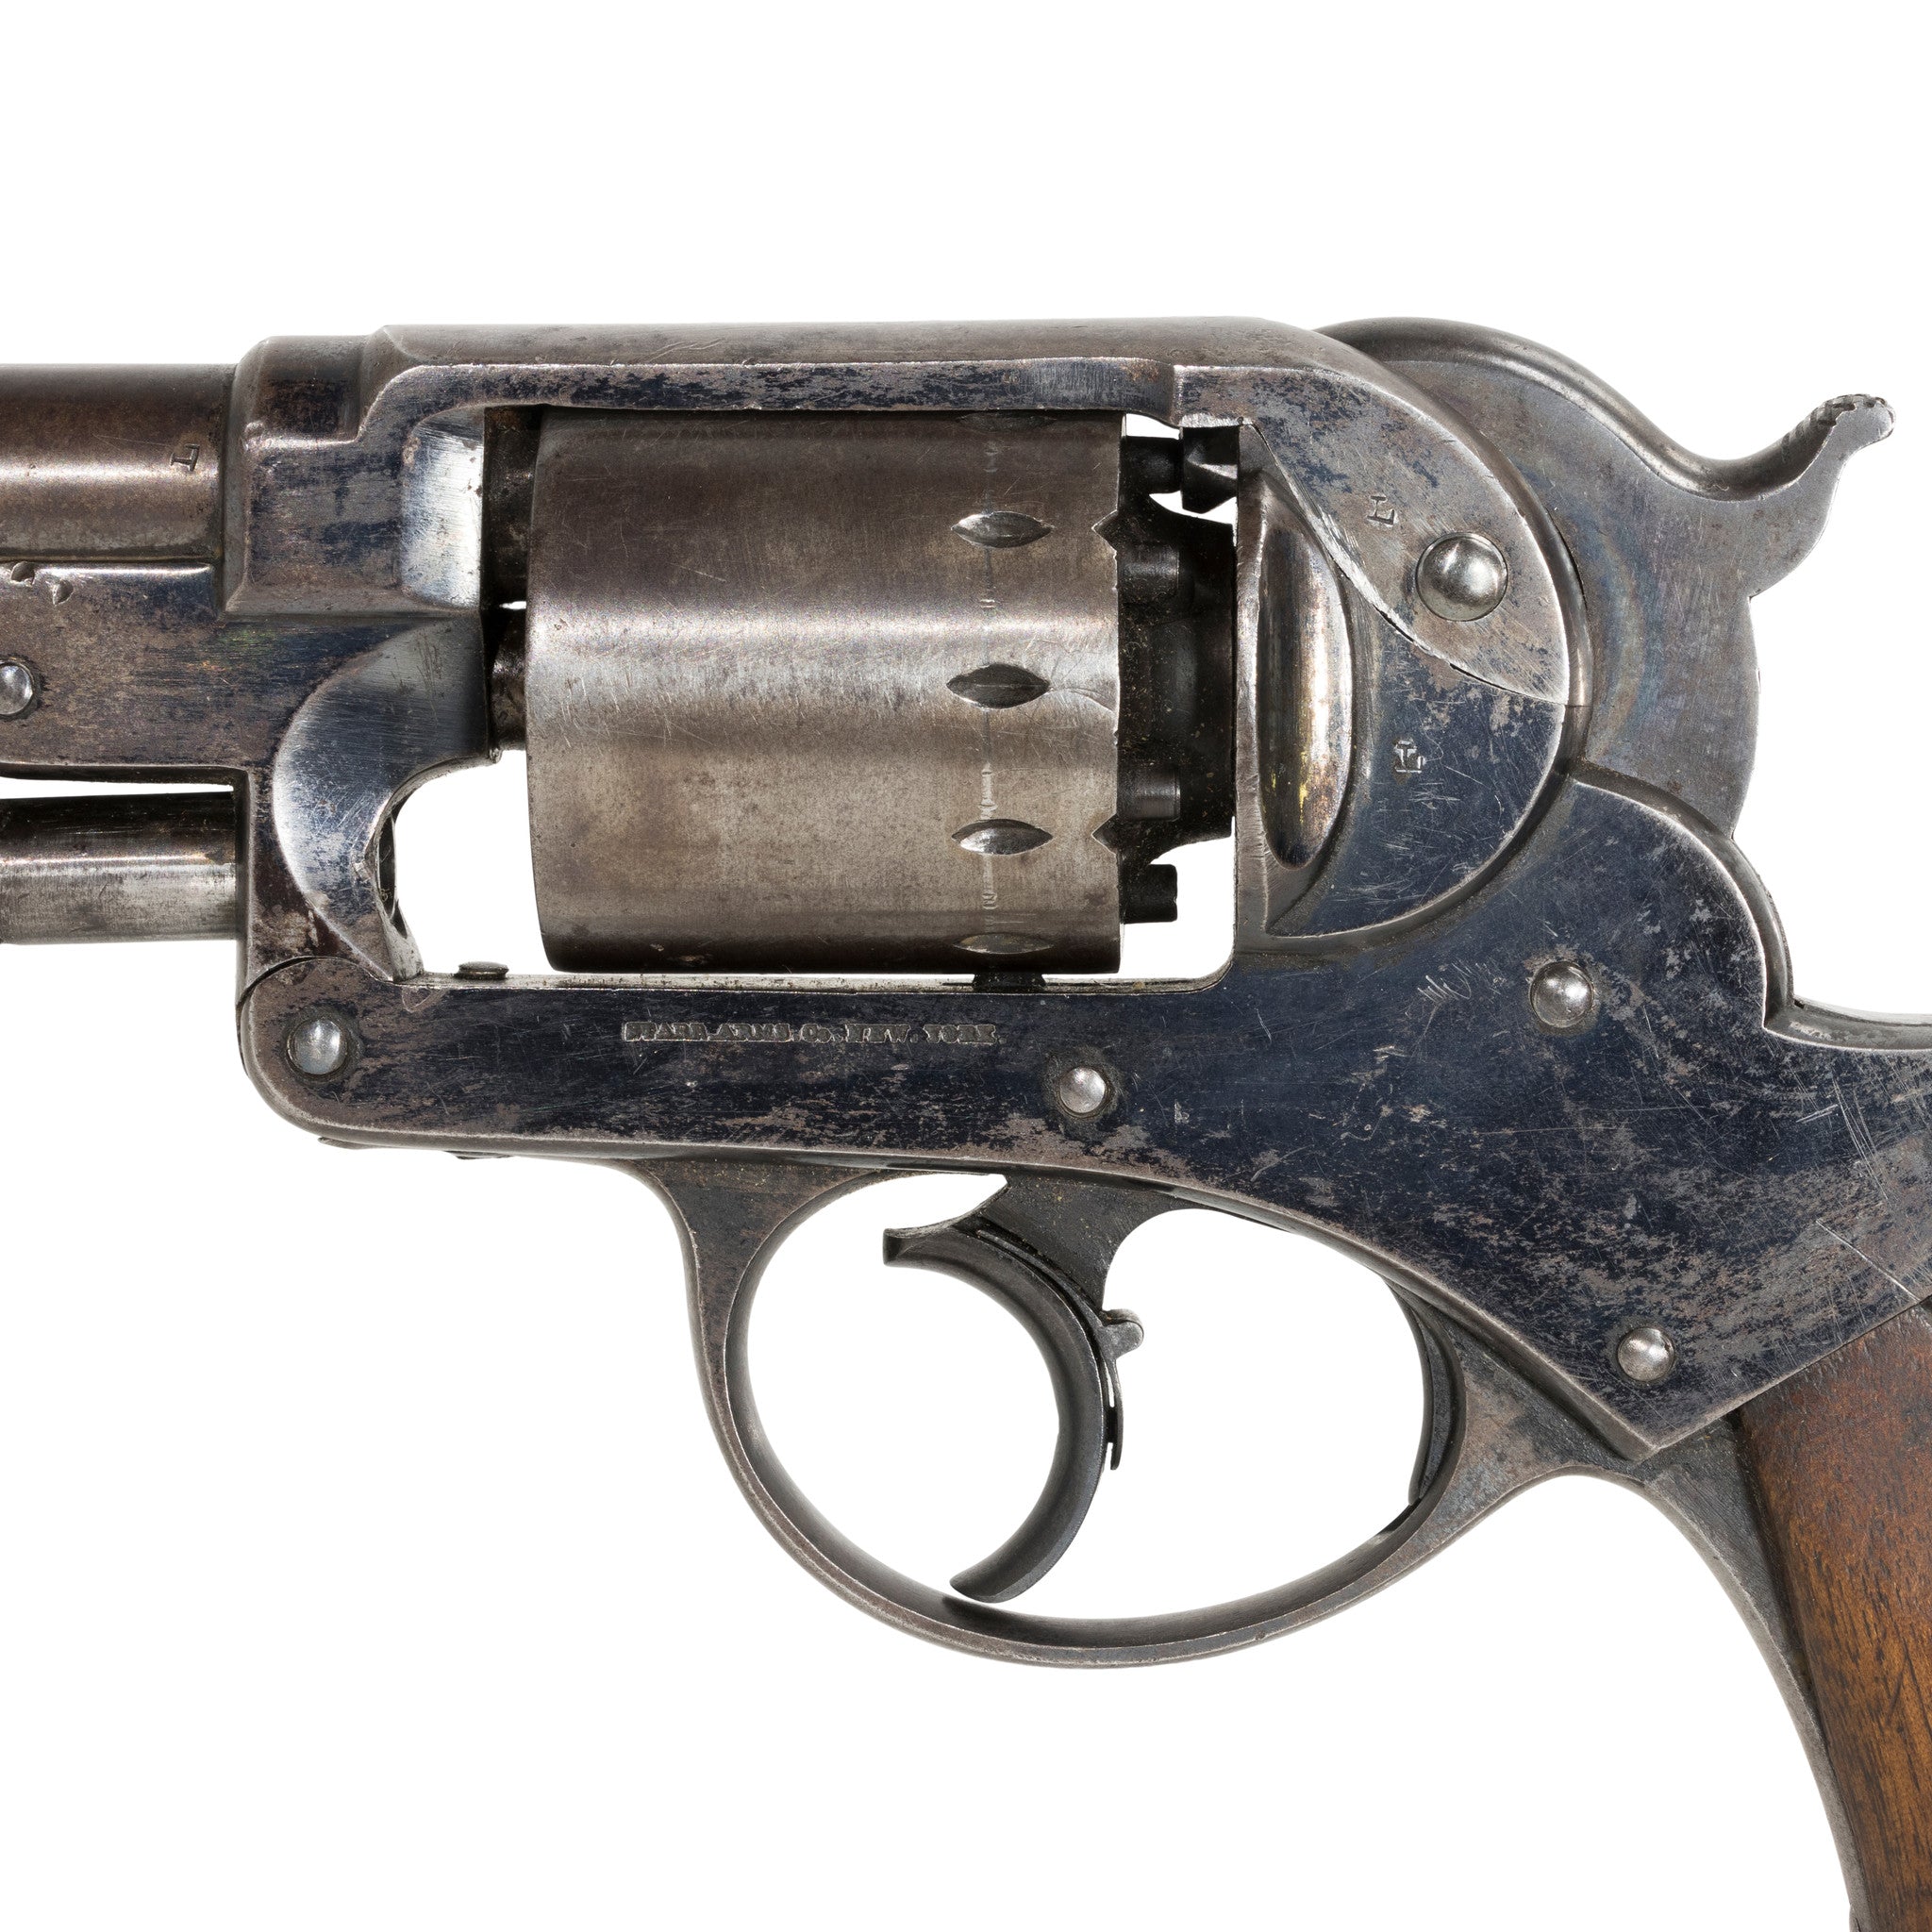 Starr Model 1858 Double Action Revolver